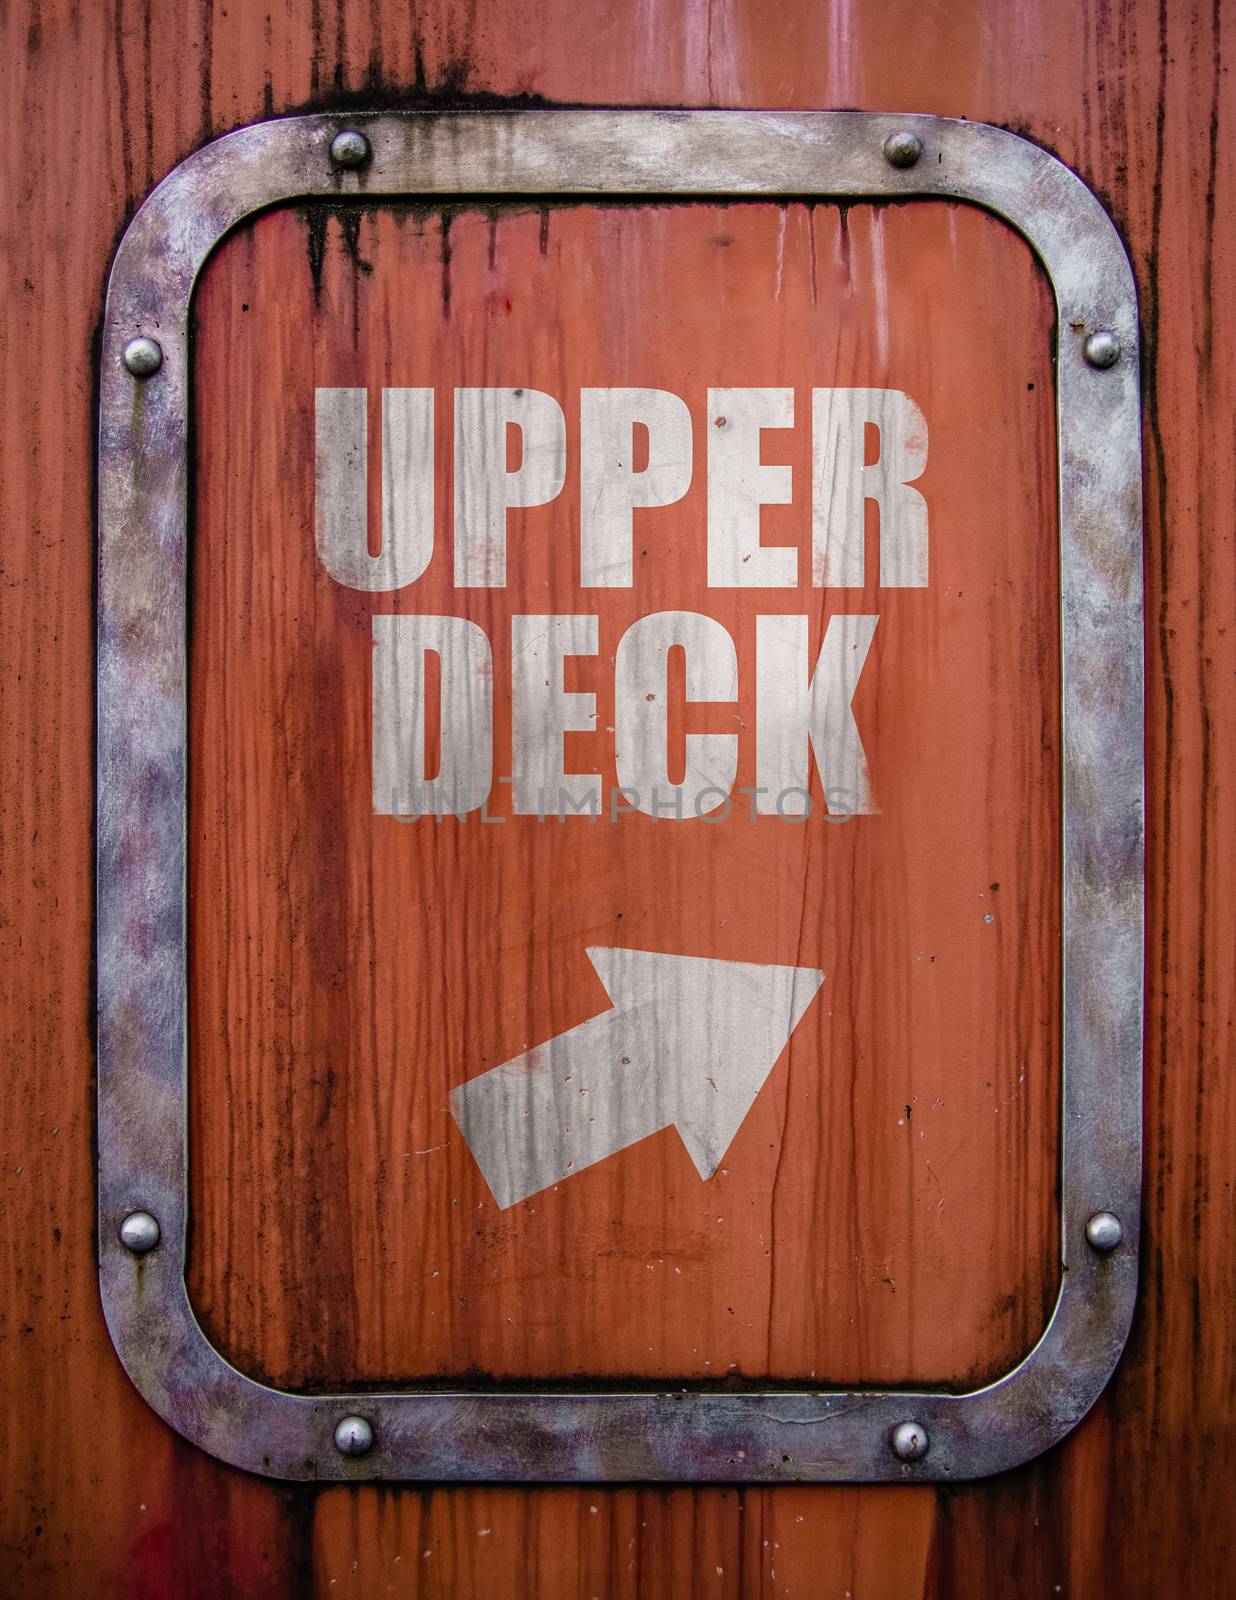 Grungy Upper Desck Sign by mrdoomits